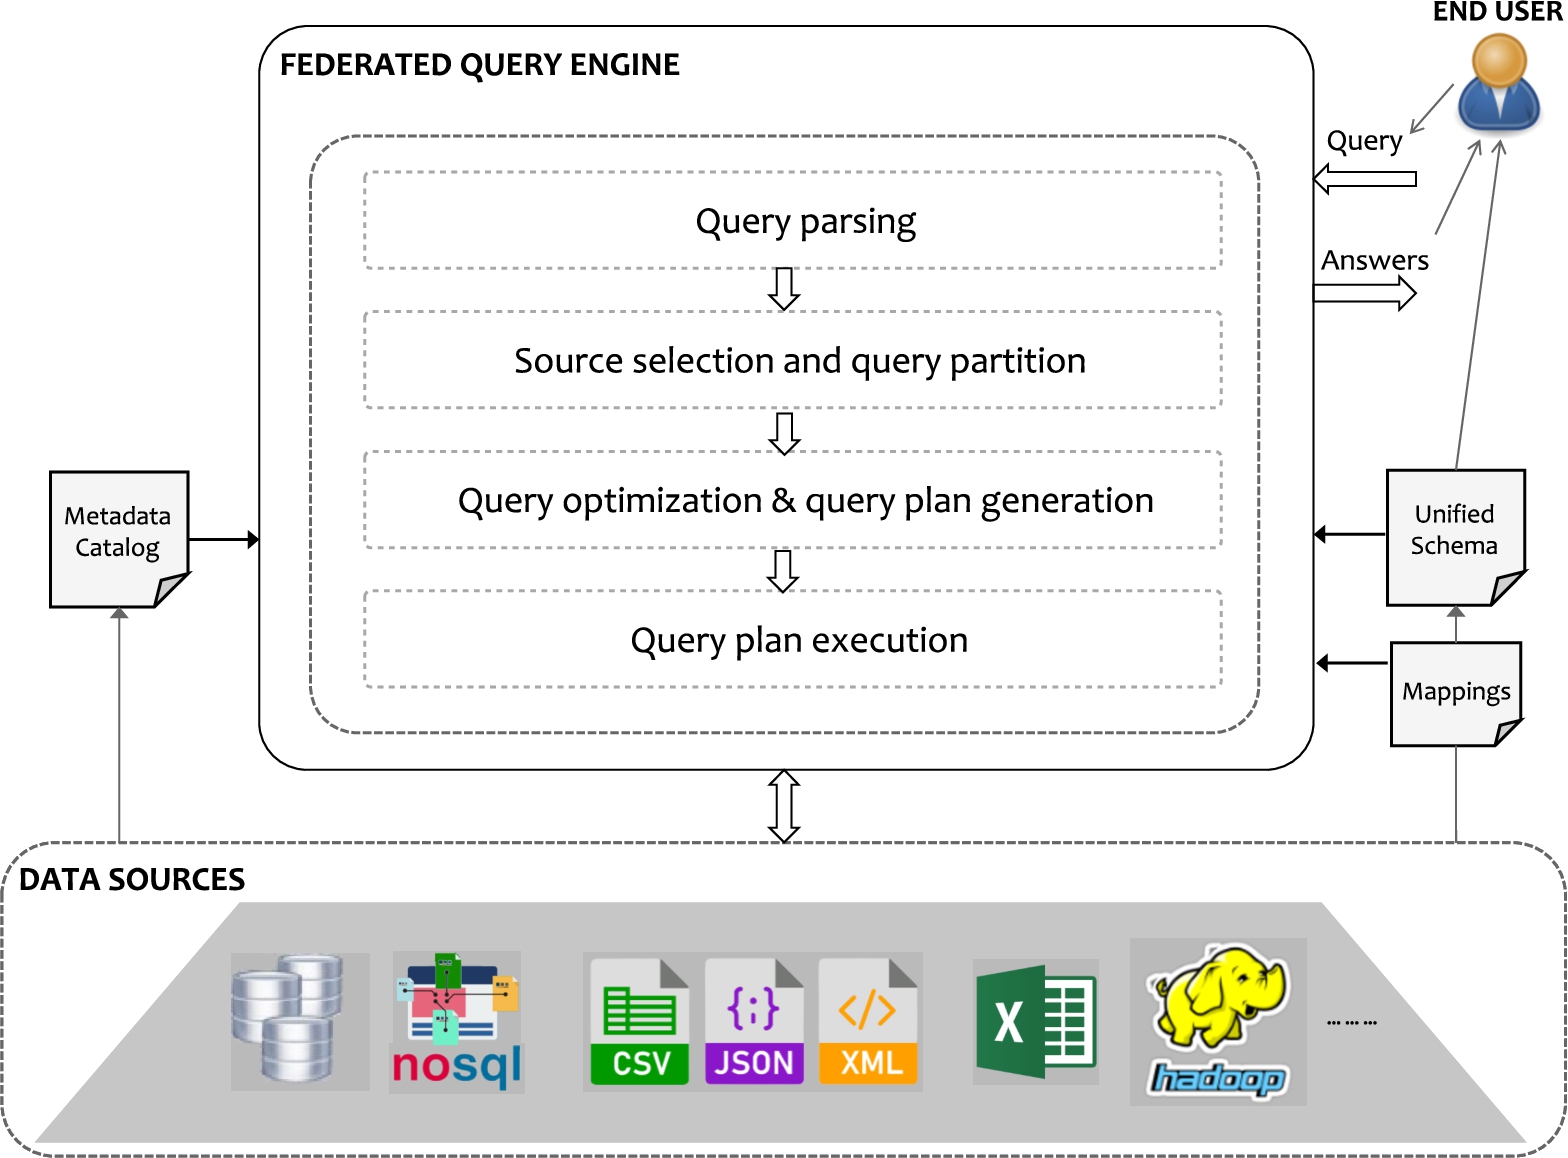 Typical architecture of a federated query engine (inspired by Oguz et al. [20]).